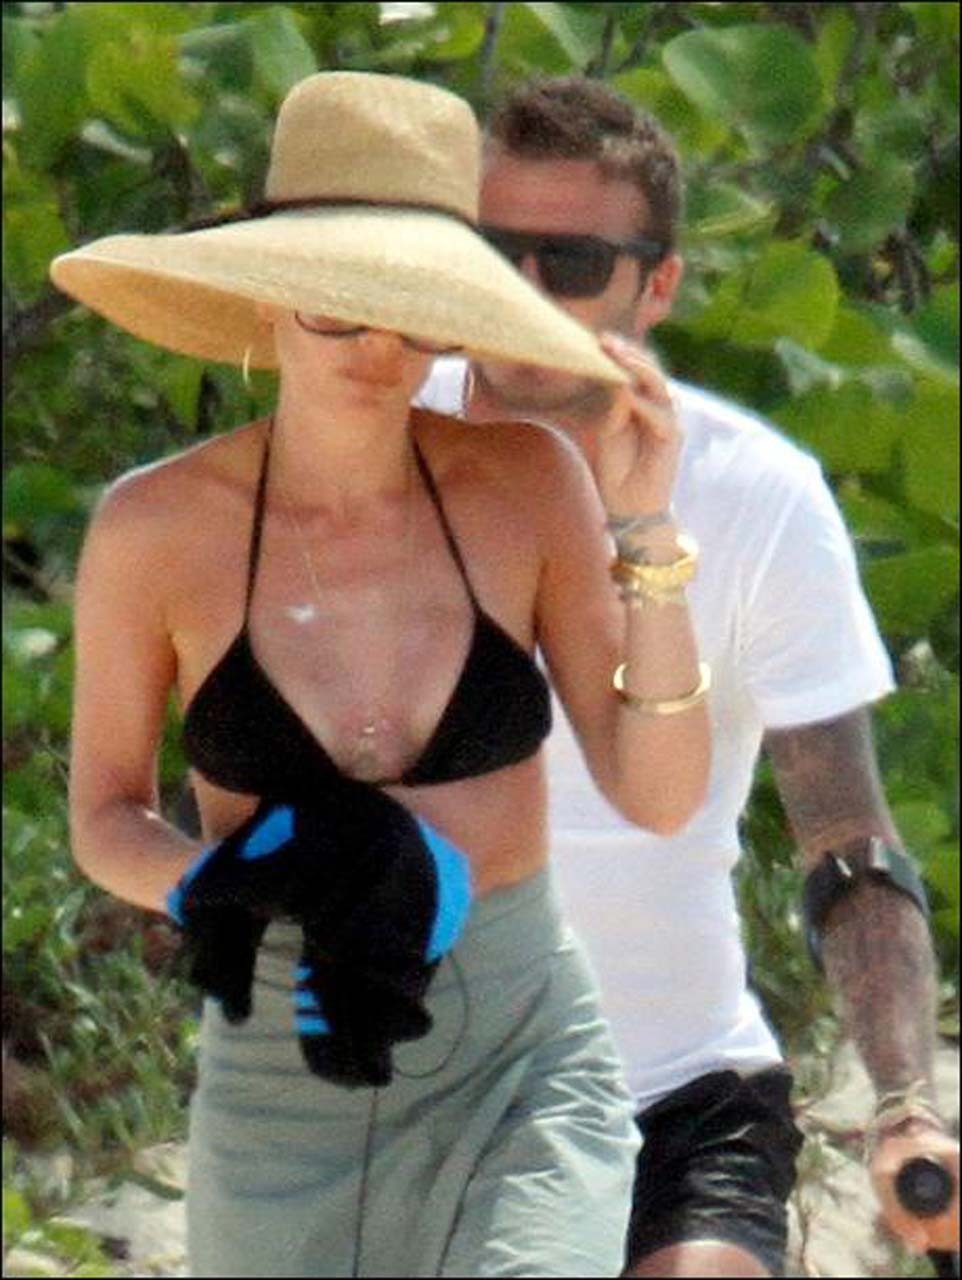 Victoria Beckham caught topless by paparazzi while sunbathing and sexy in bikini #75324480